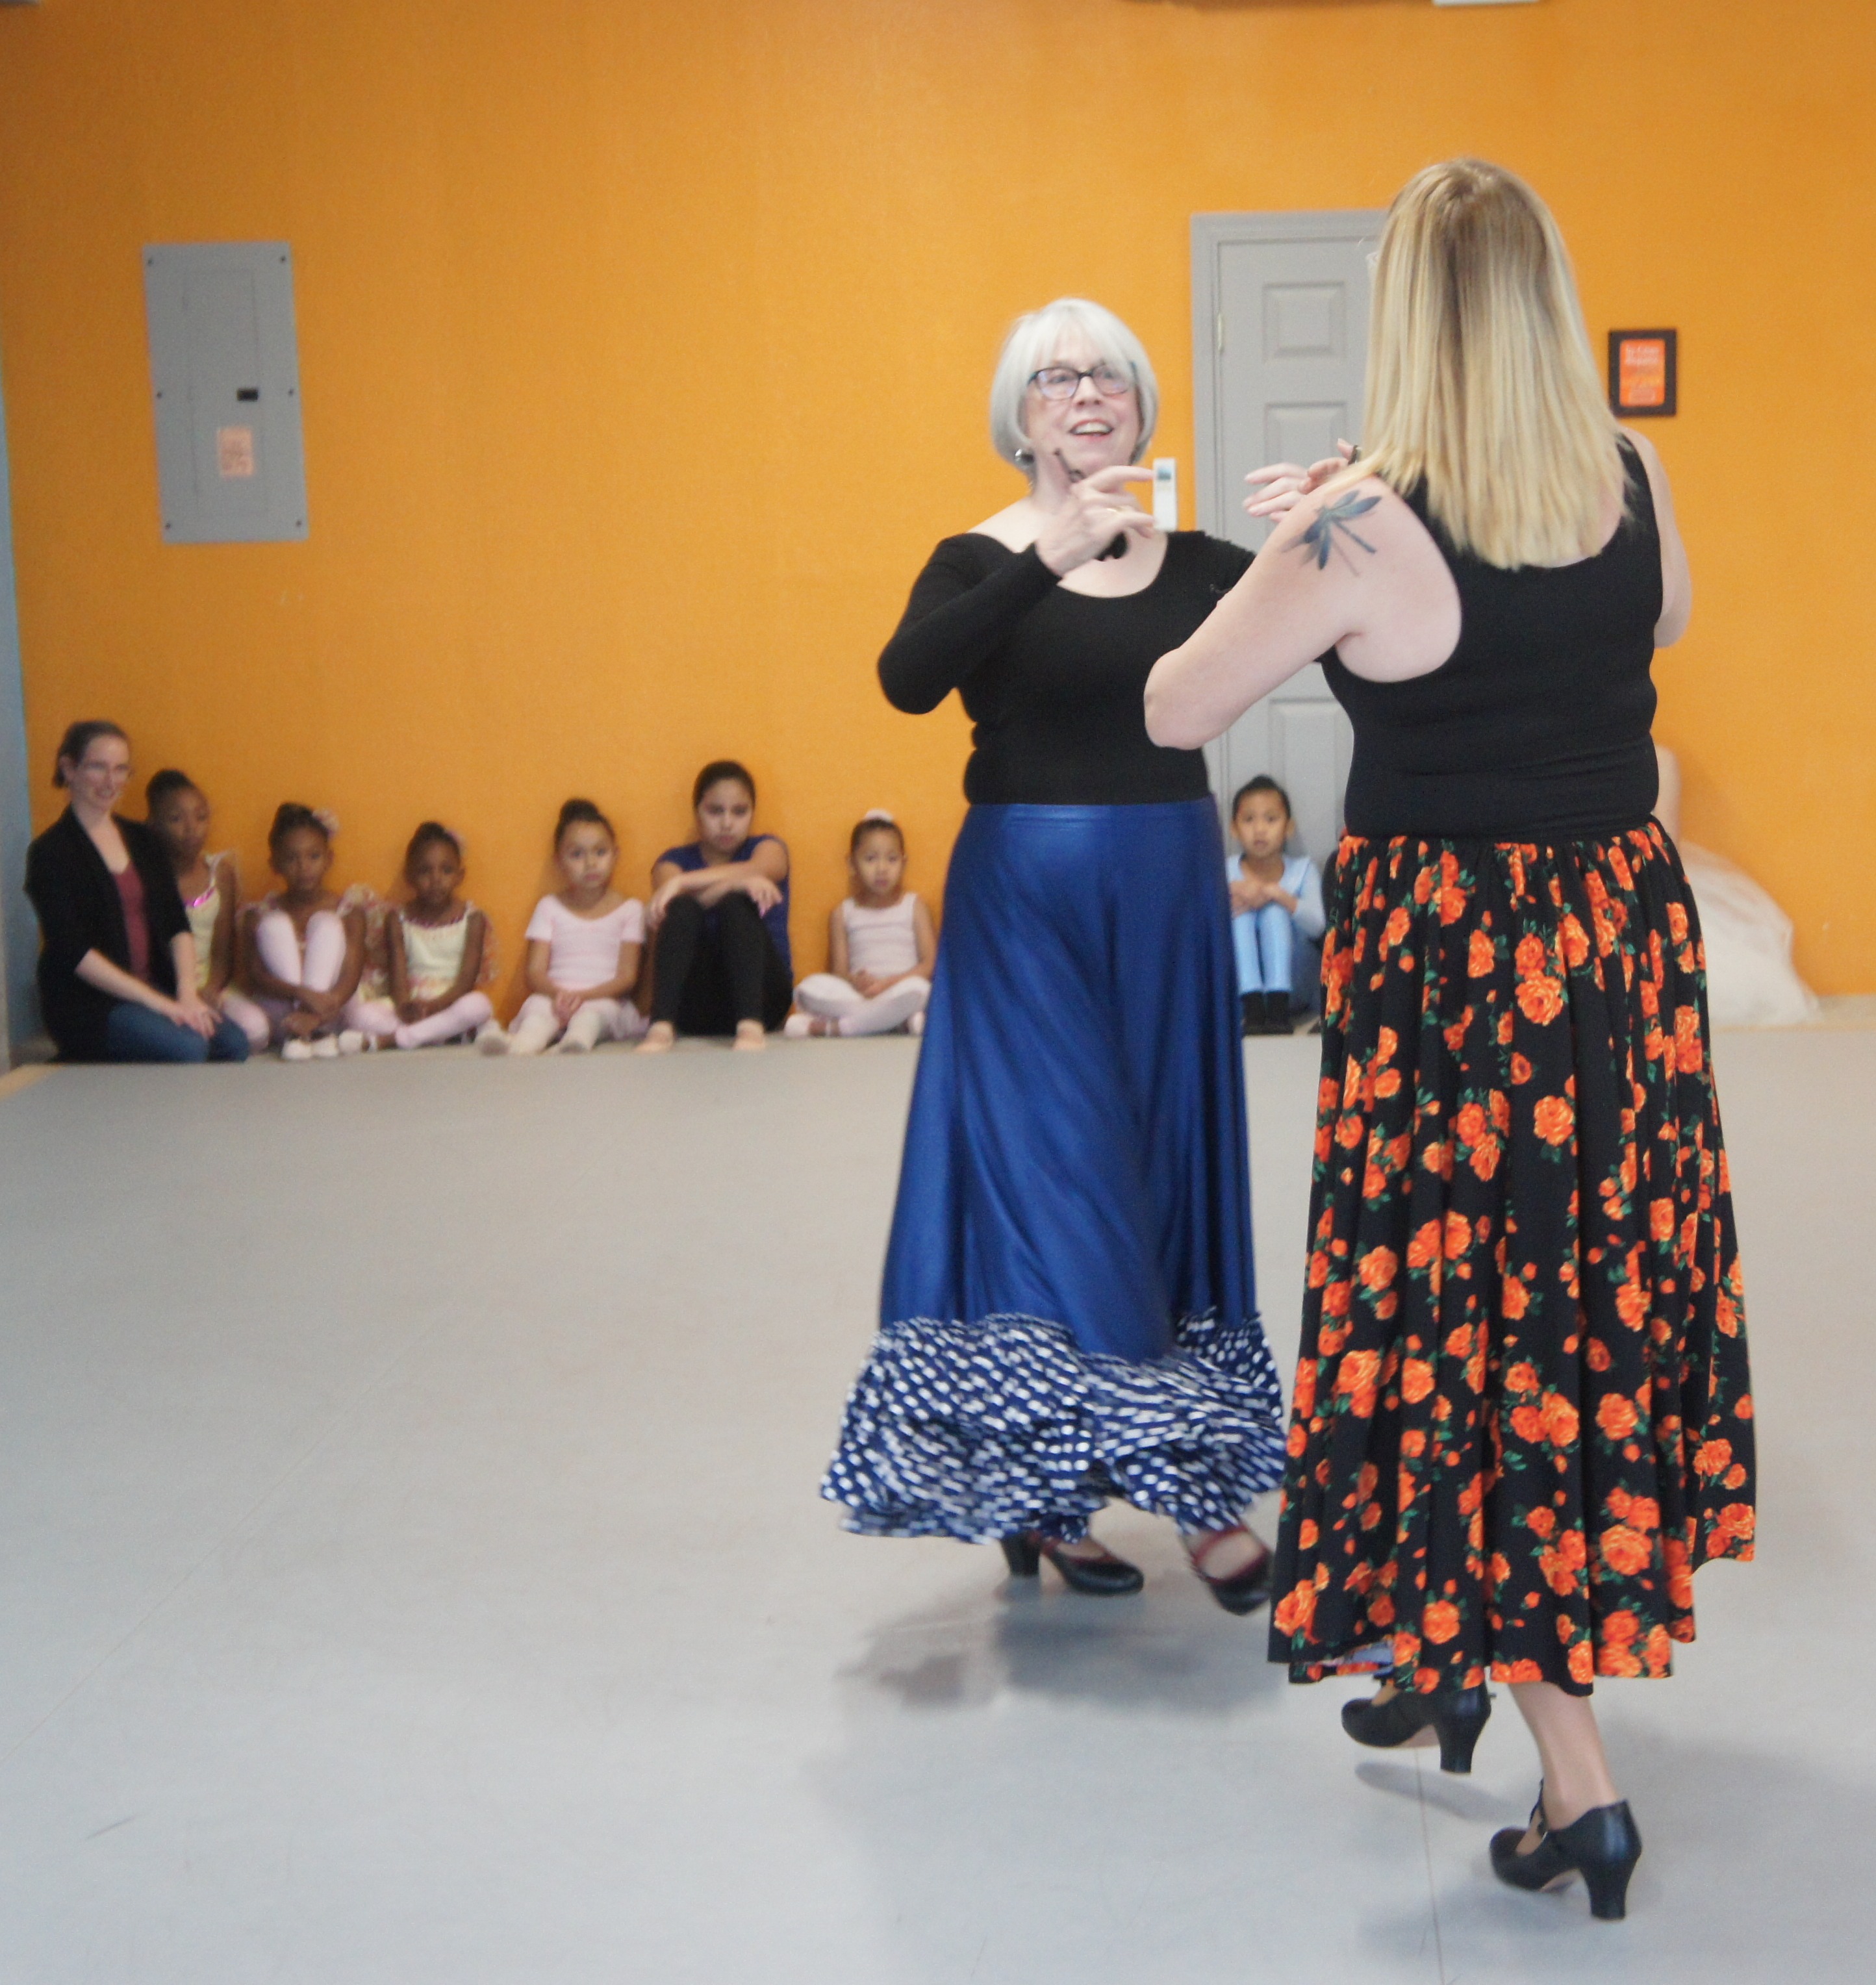 At a Find Your Center studio performance in 2019, two adult women dance together in flamenco skirts and shoes on a light gray floor, while multiracial children in yellow, pink, black, and blue ballet clothes sit with their instructor by an orange wall and watch